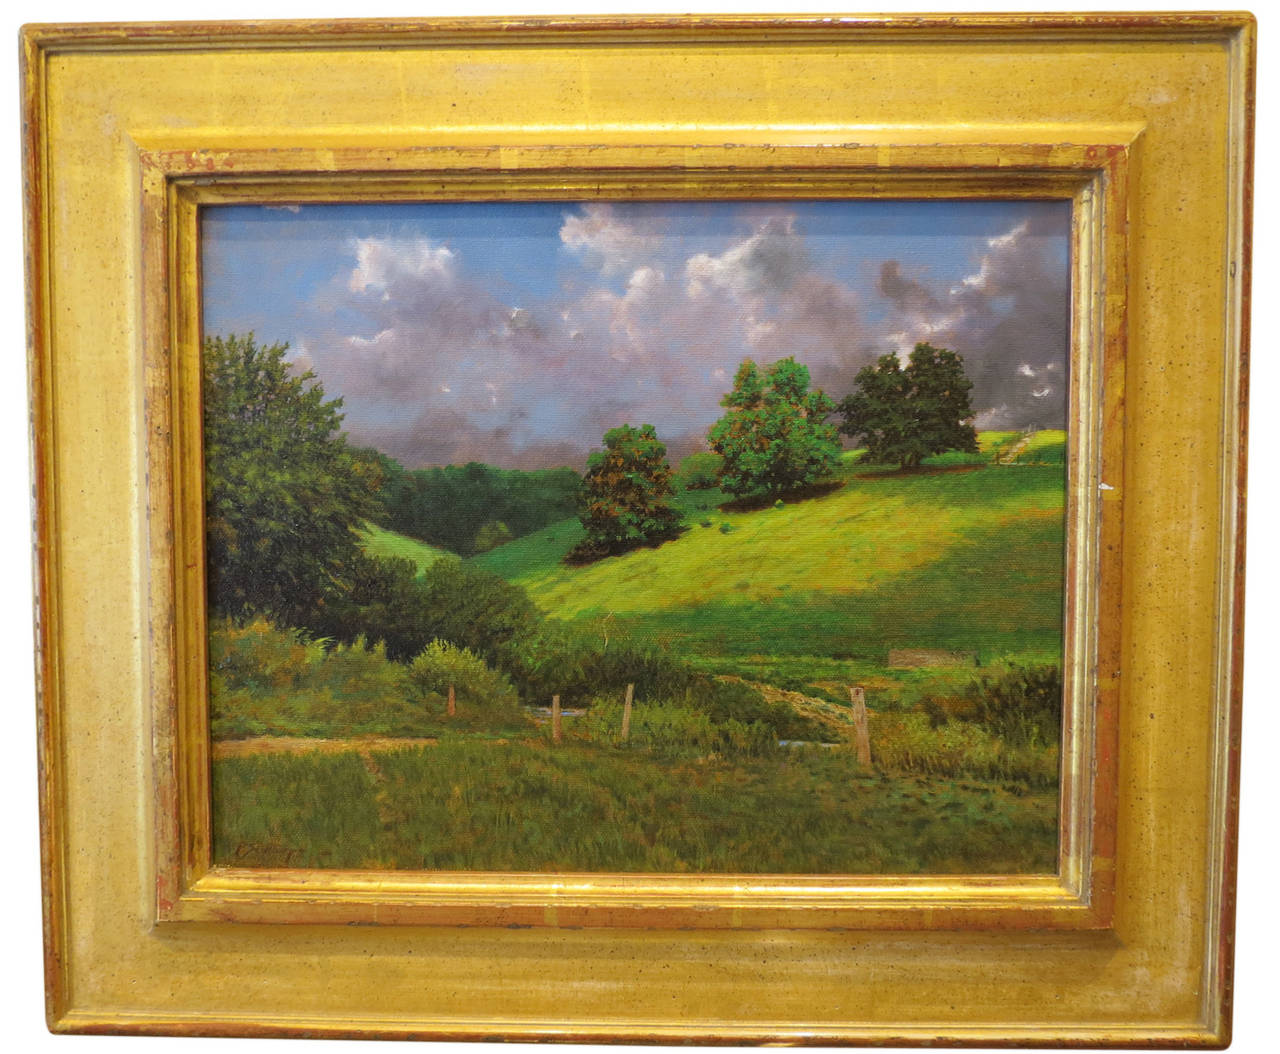 Peter Sculthorpe Landscape Painting - "Afternoon Storm"